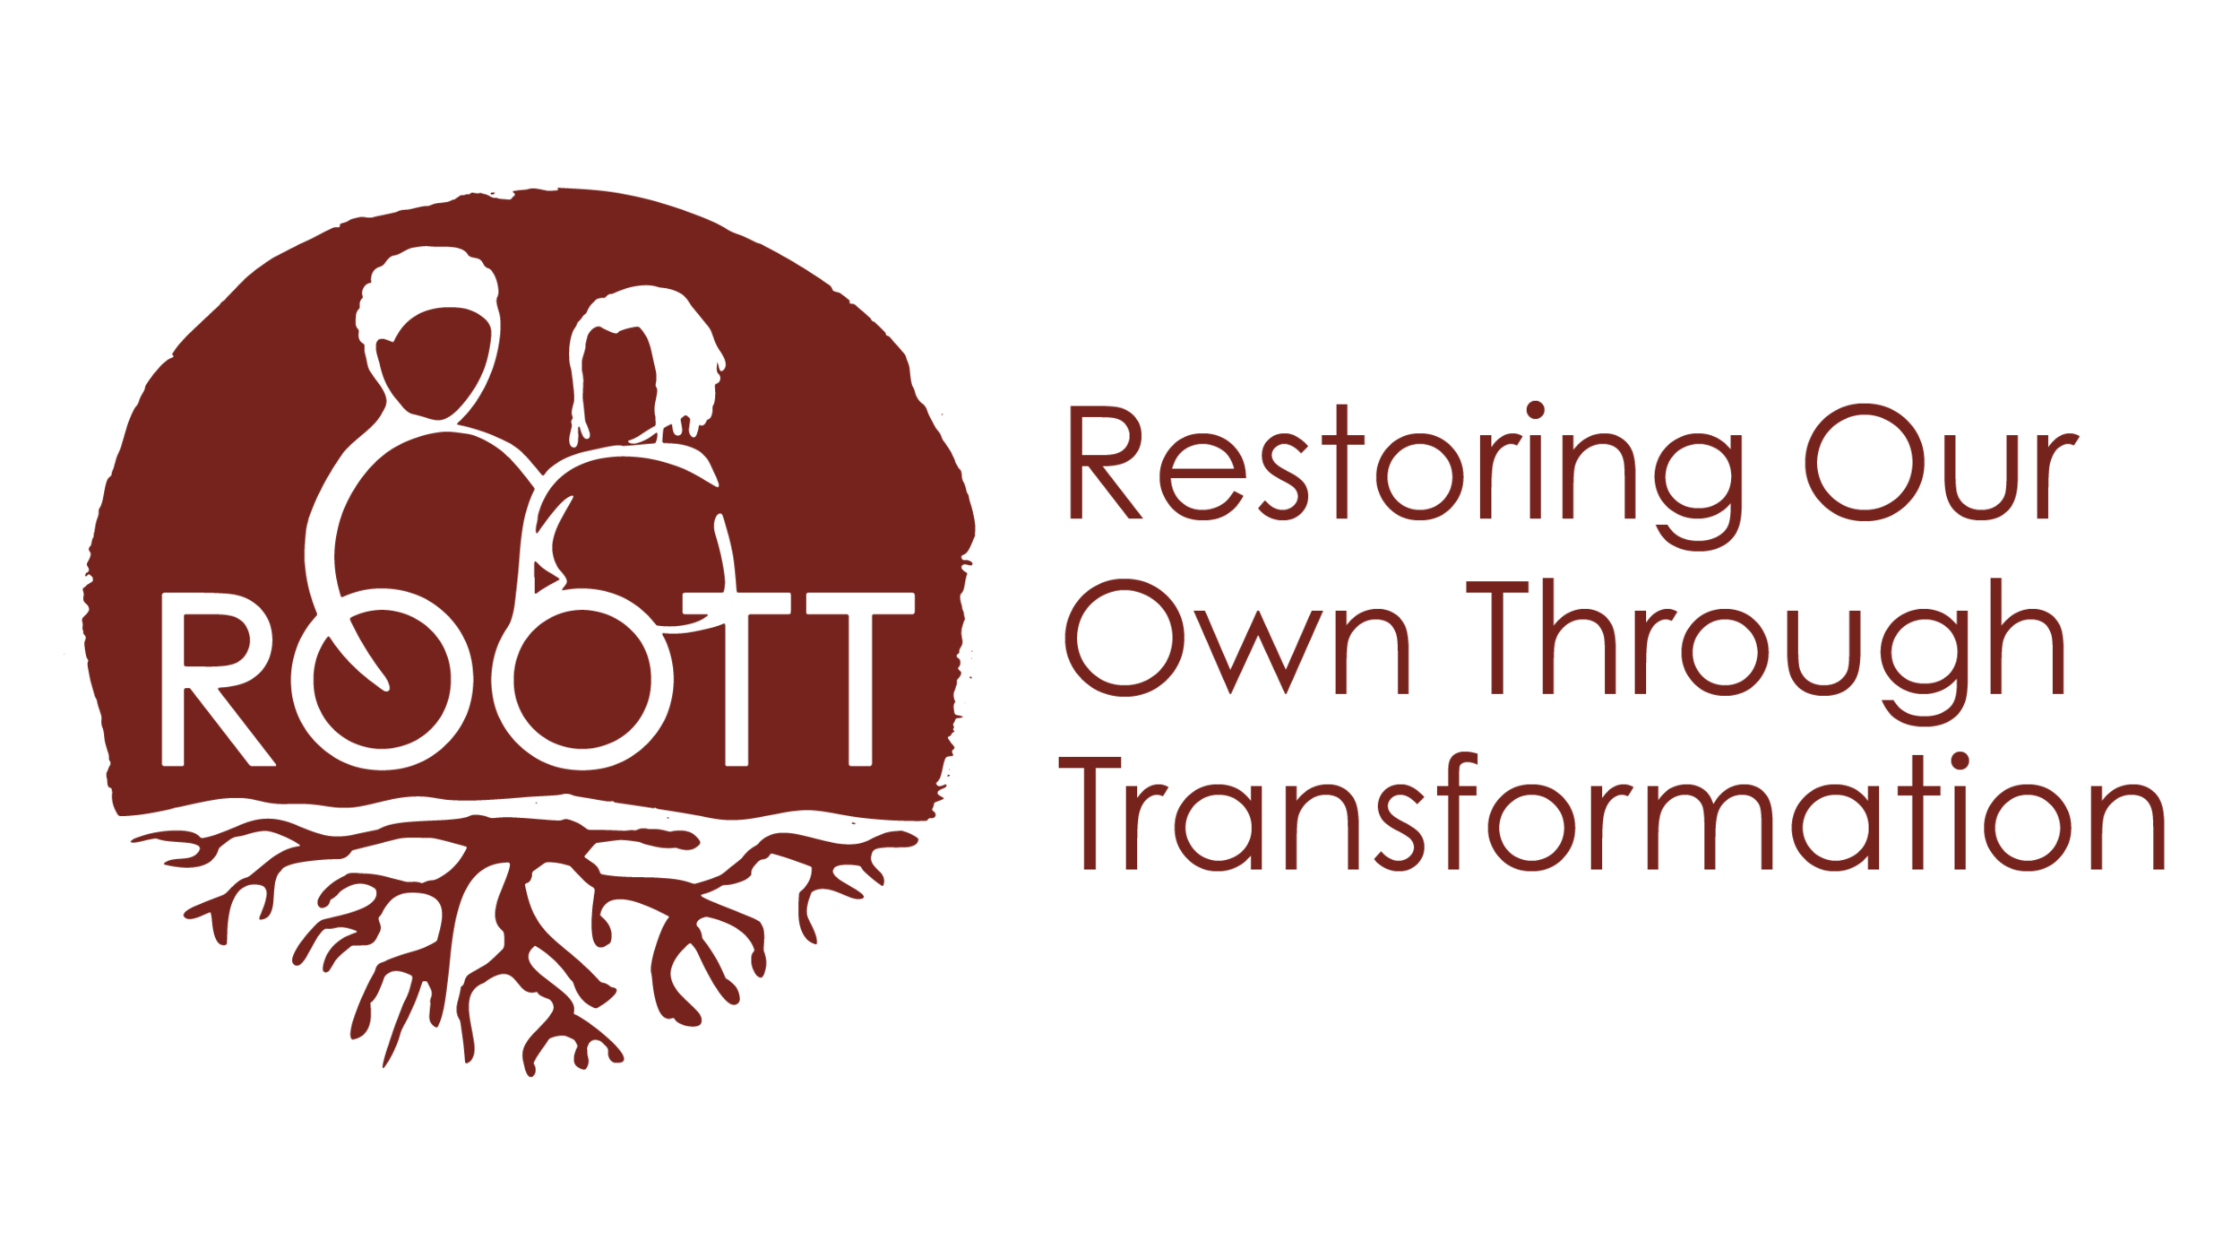 Restoring Our Own Through Transformation